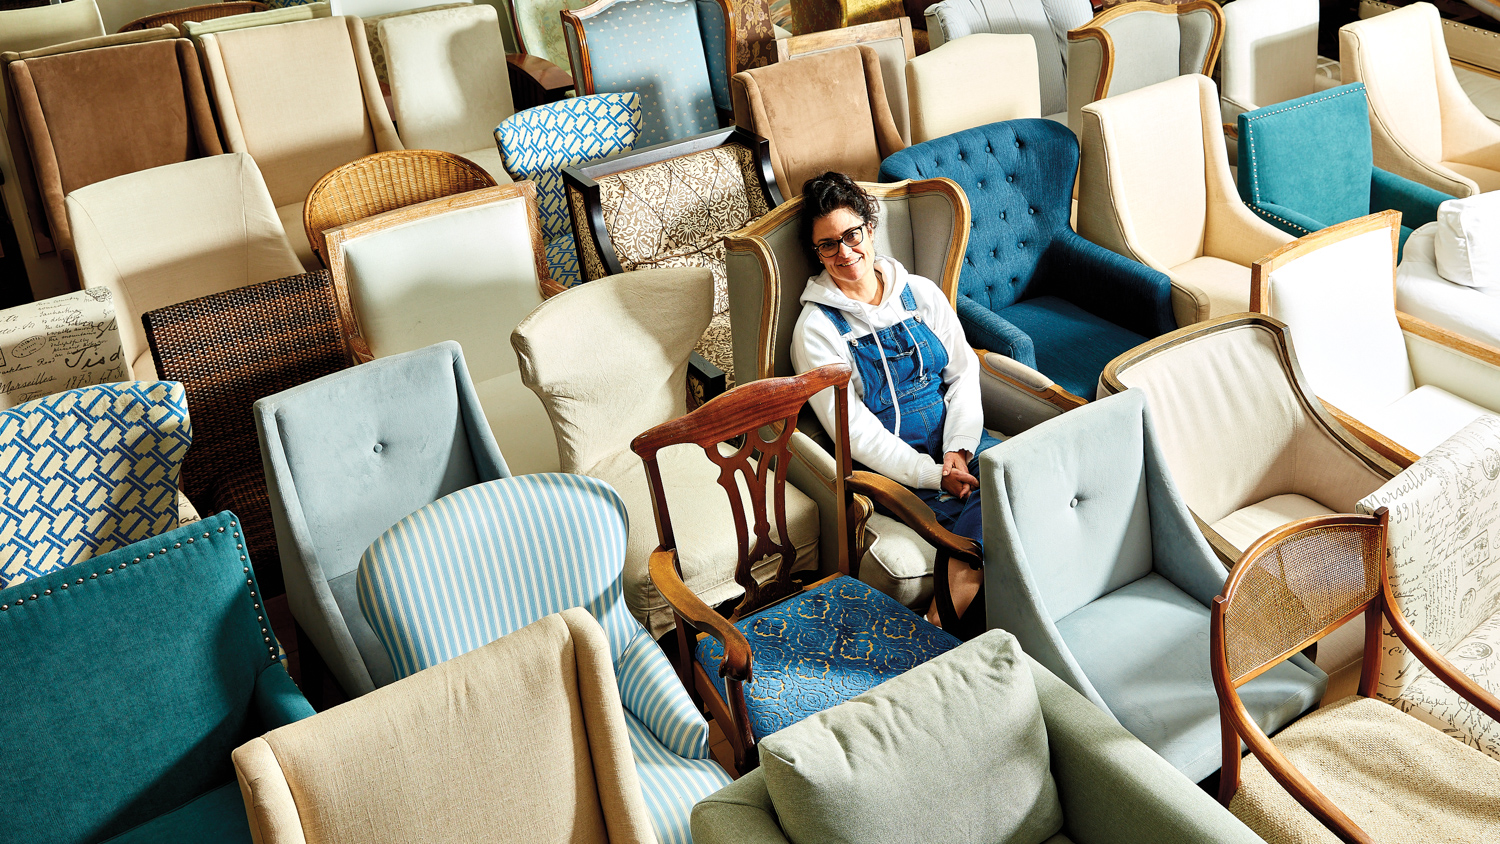 Designer Carolyn Flannery seated amongst rows of different chairs